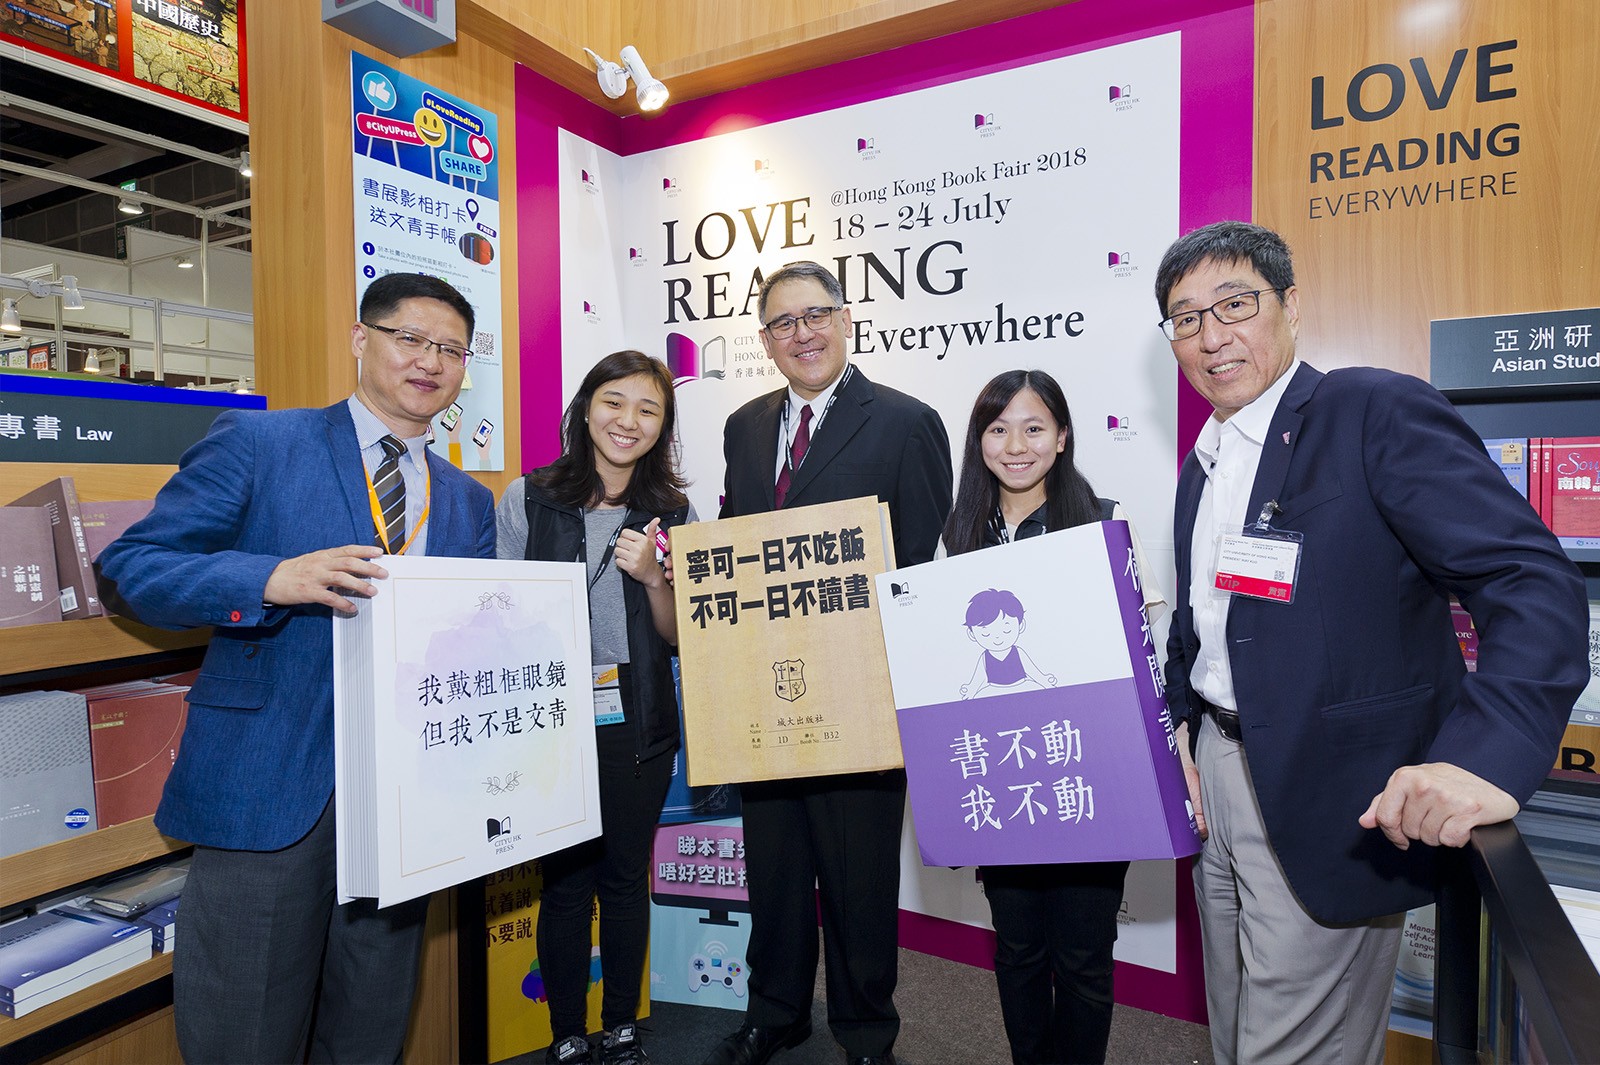 Mr Lester Garson Huang (middle), Council Chairman; Professor Way Kuo (first from right), CityU President; Professor Zhu Guobin (first from left), Director of CityU Press, visit the CityU Press booth at the Hong Kong Book Fair. 